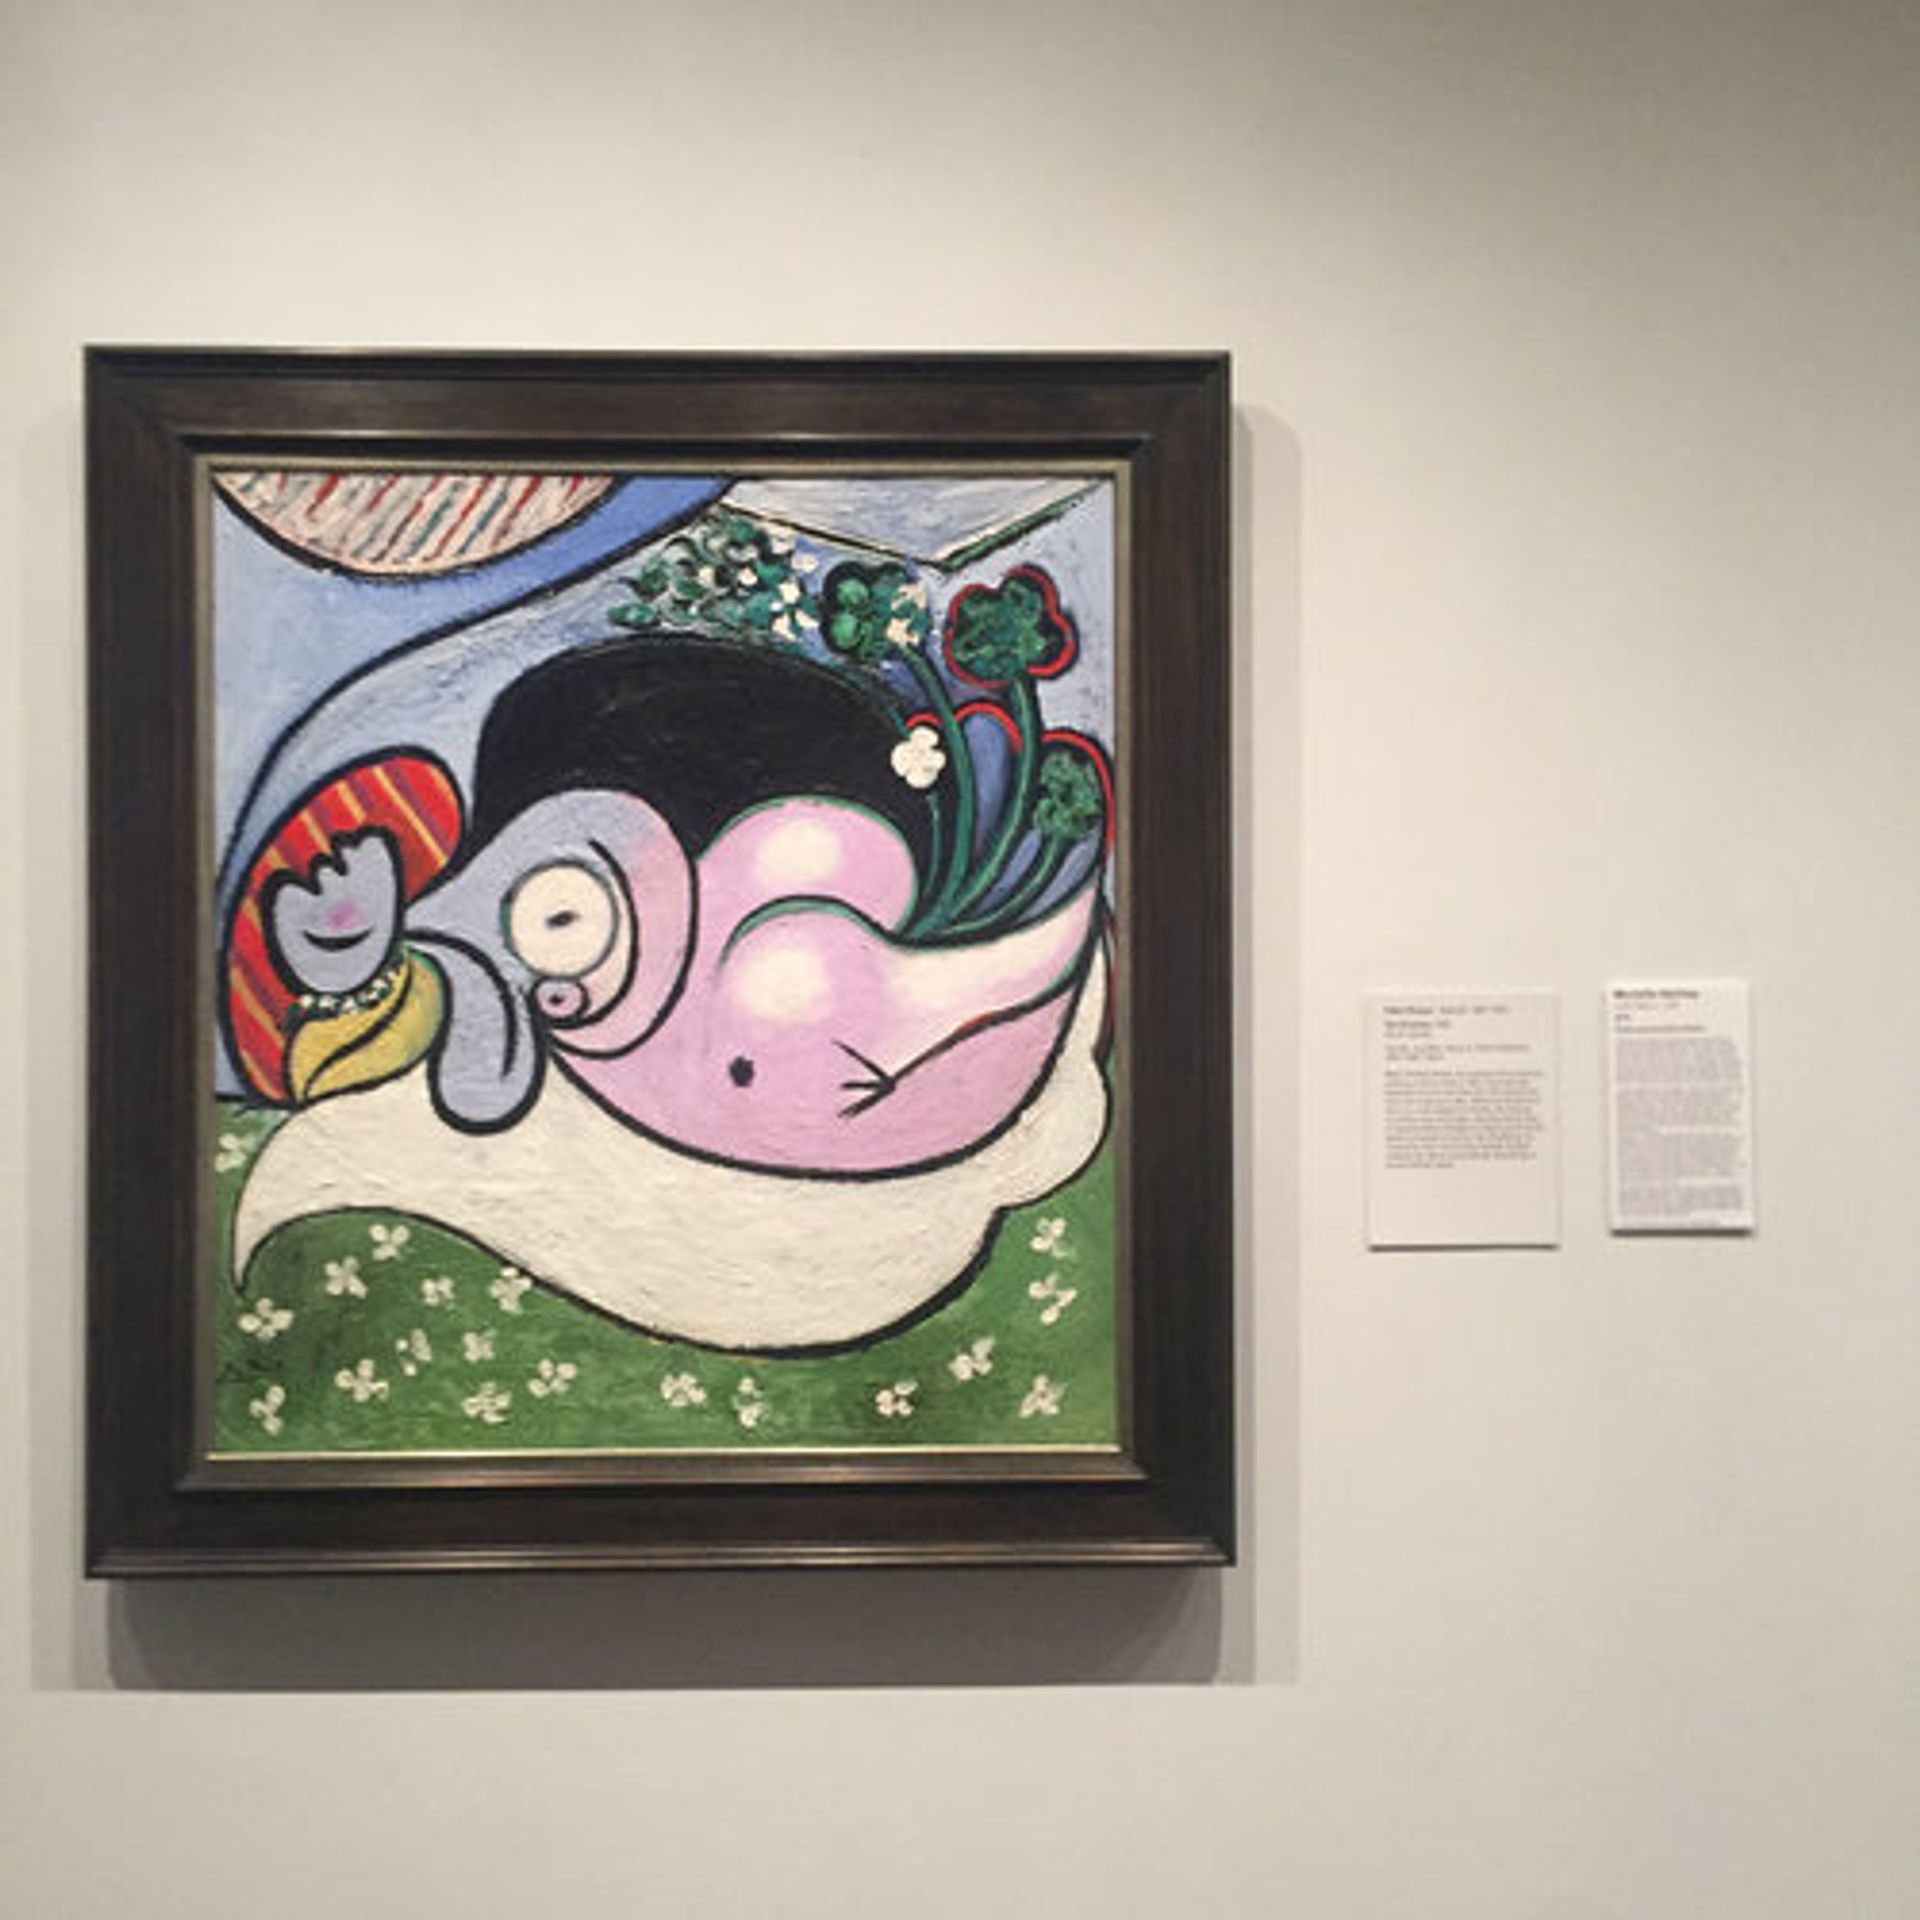 Picasso's The Dreamer from 1932 at the Met. A protest label is affixed to the wall on the far right. Michelle Hartney